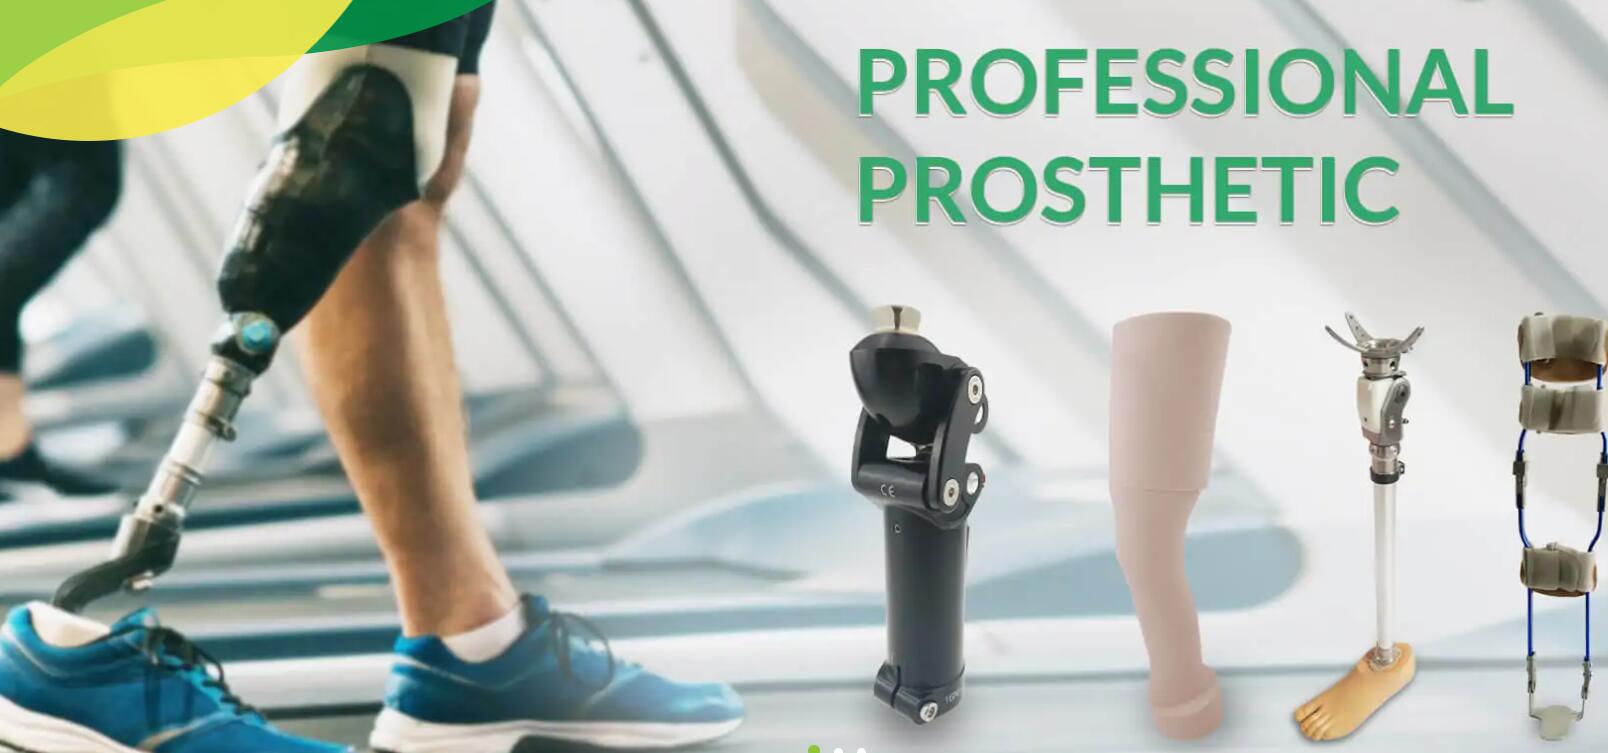 How To Choose Knee Prosthetic System?